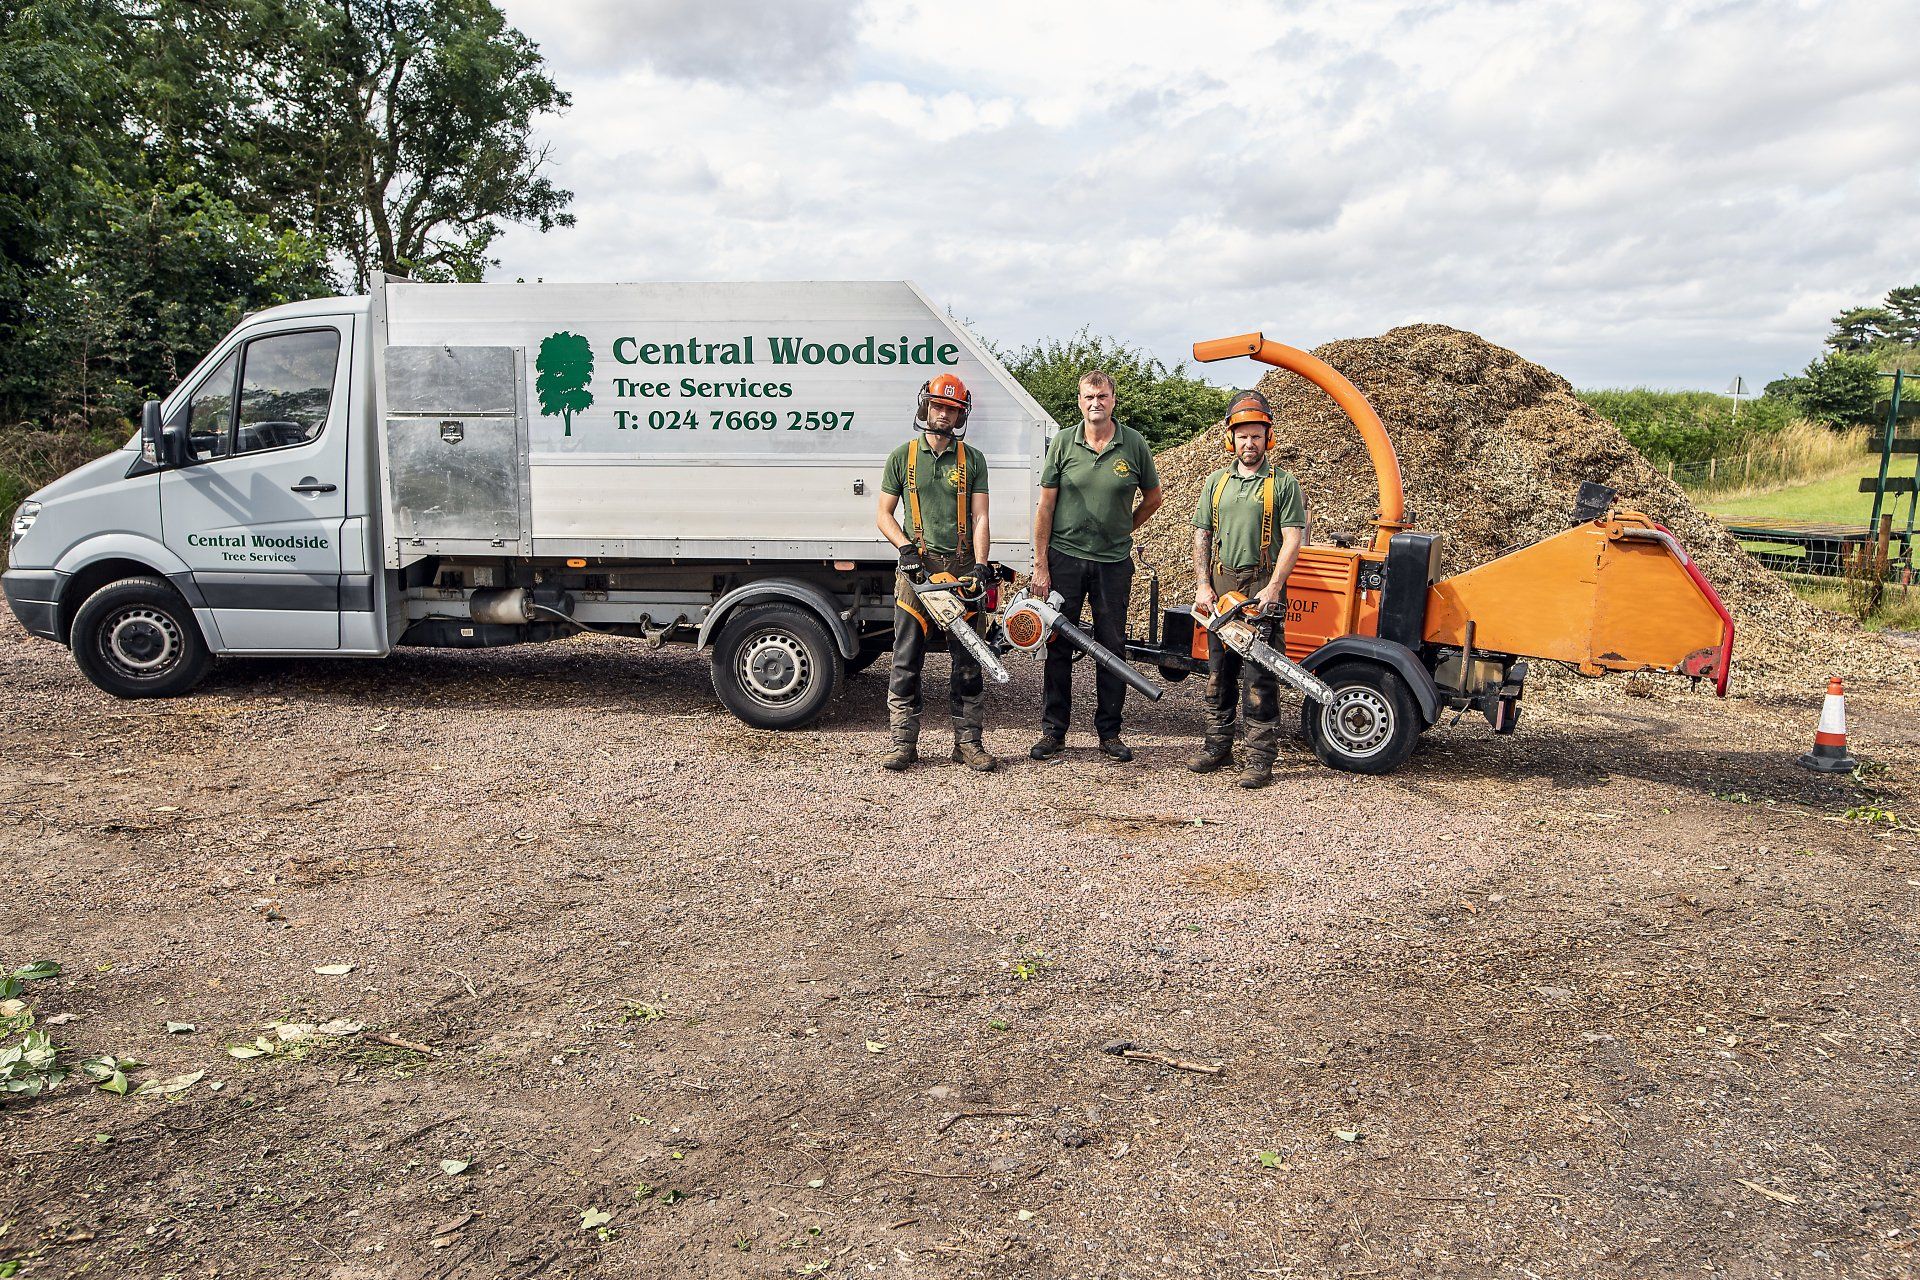 Tree surgeons at Central Woodside Tree Services